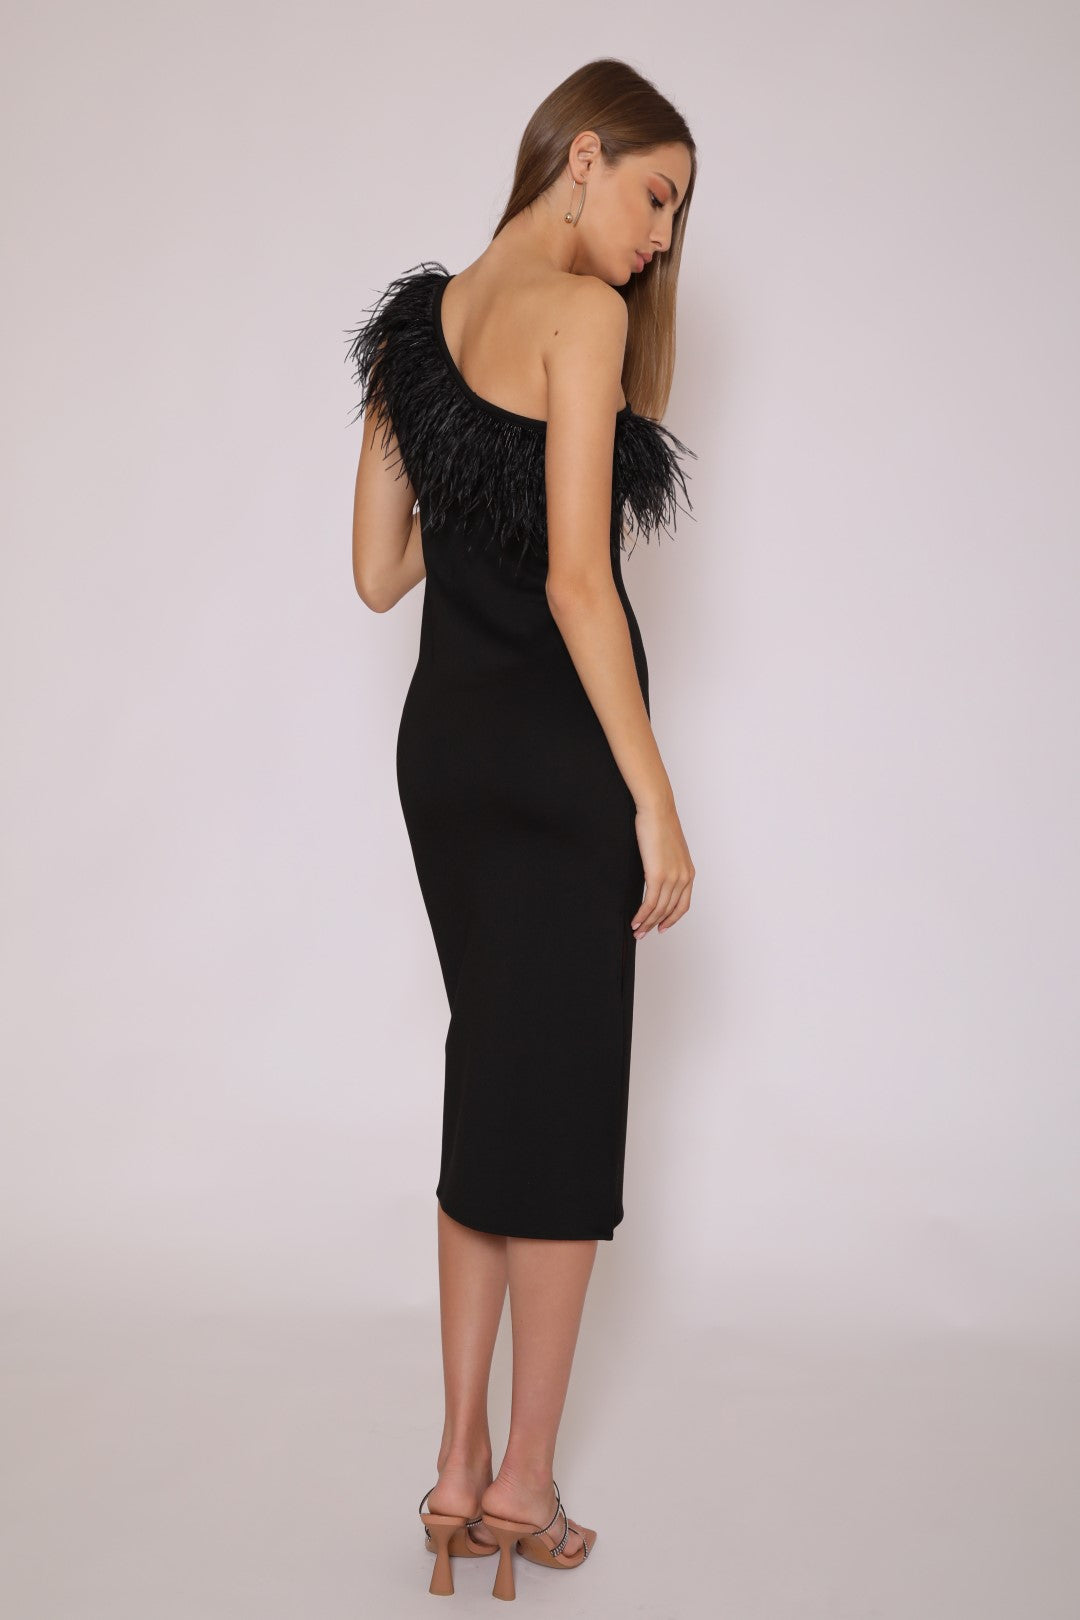 Feathered One Shouldered Dress